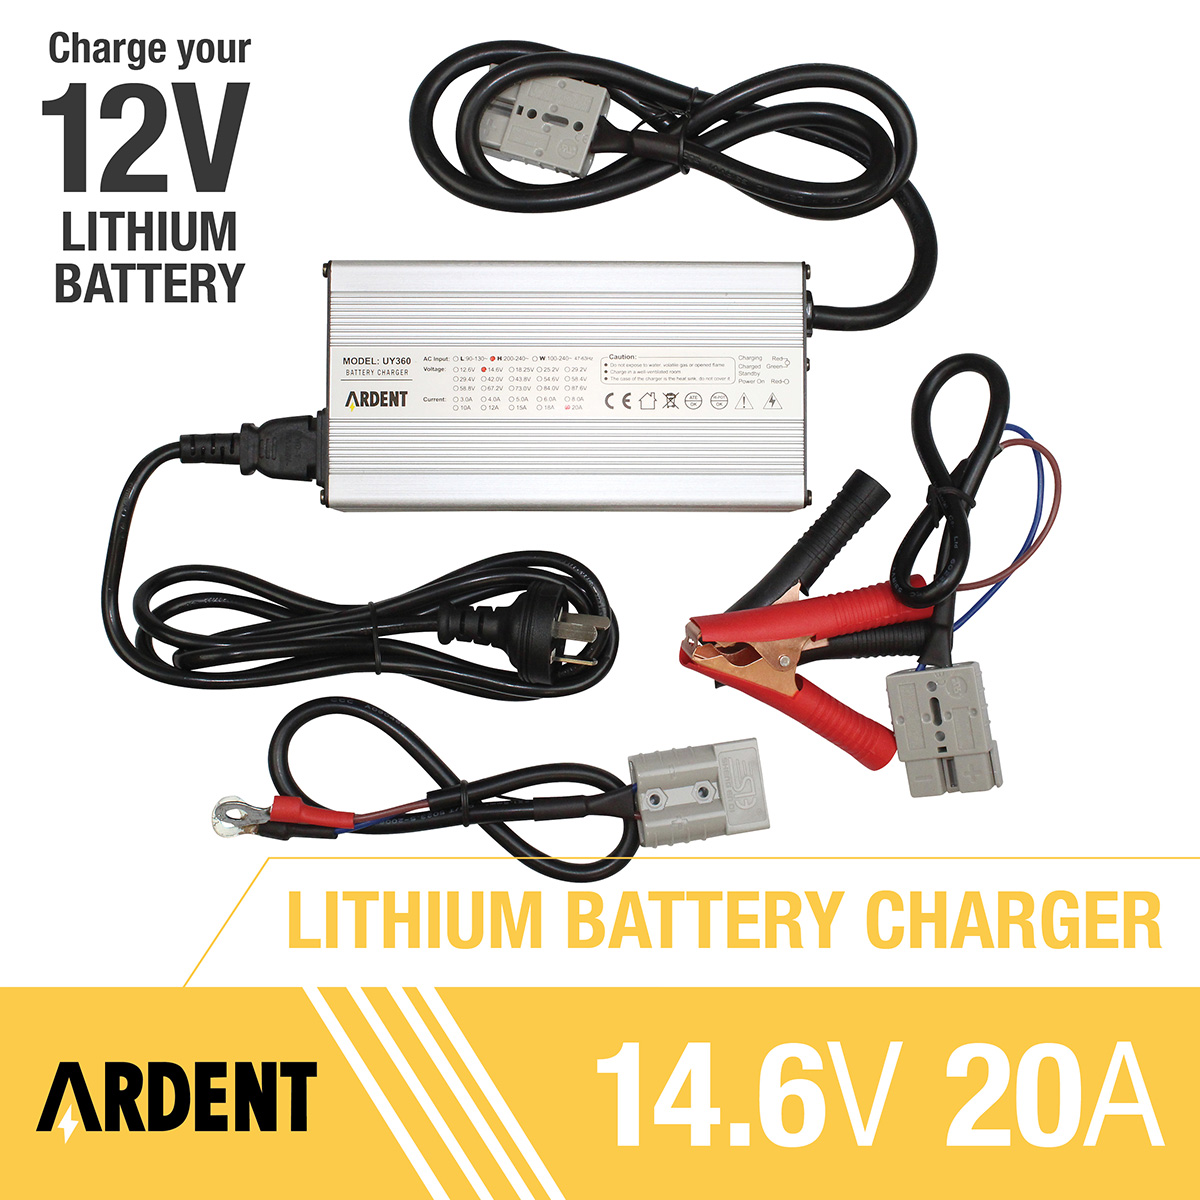 ARDENT BATTERY CHARGER 